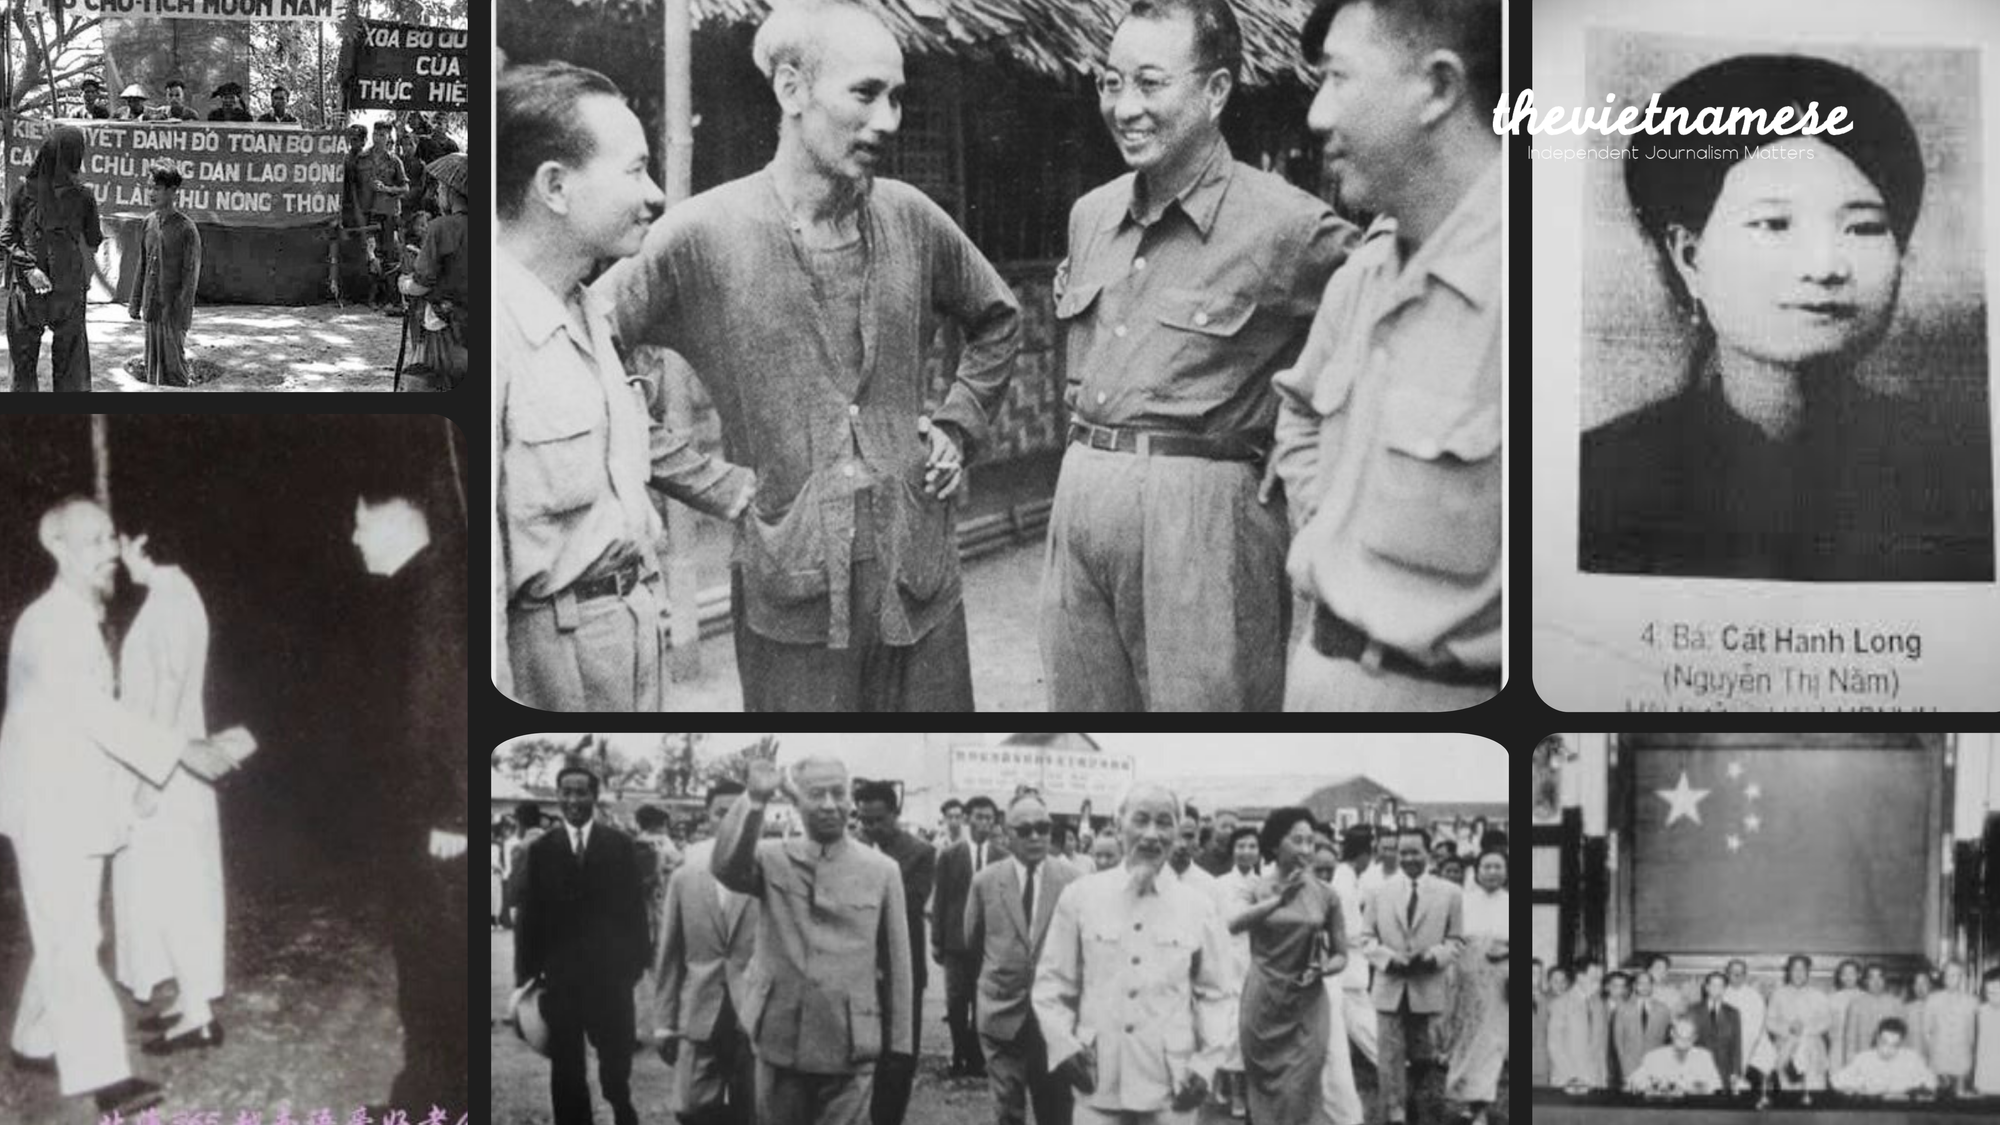 Research Review: Chinese Influence in North Vietnam's 1953 Land Reform  Campaign